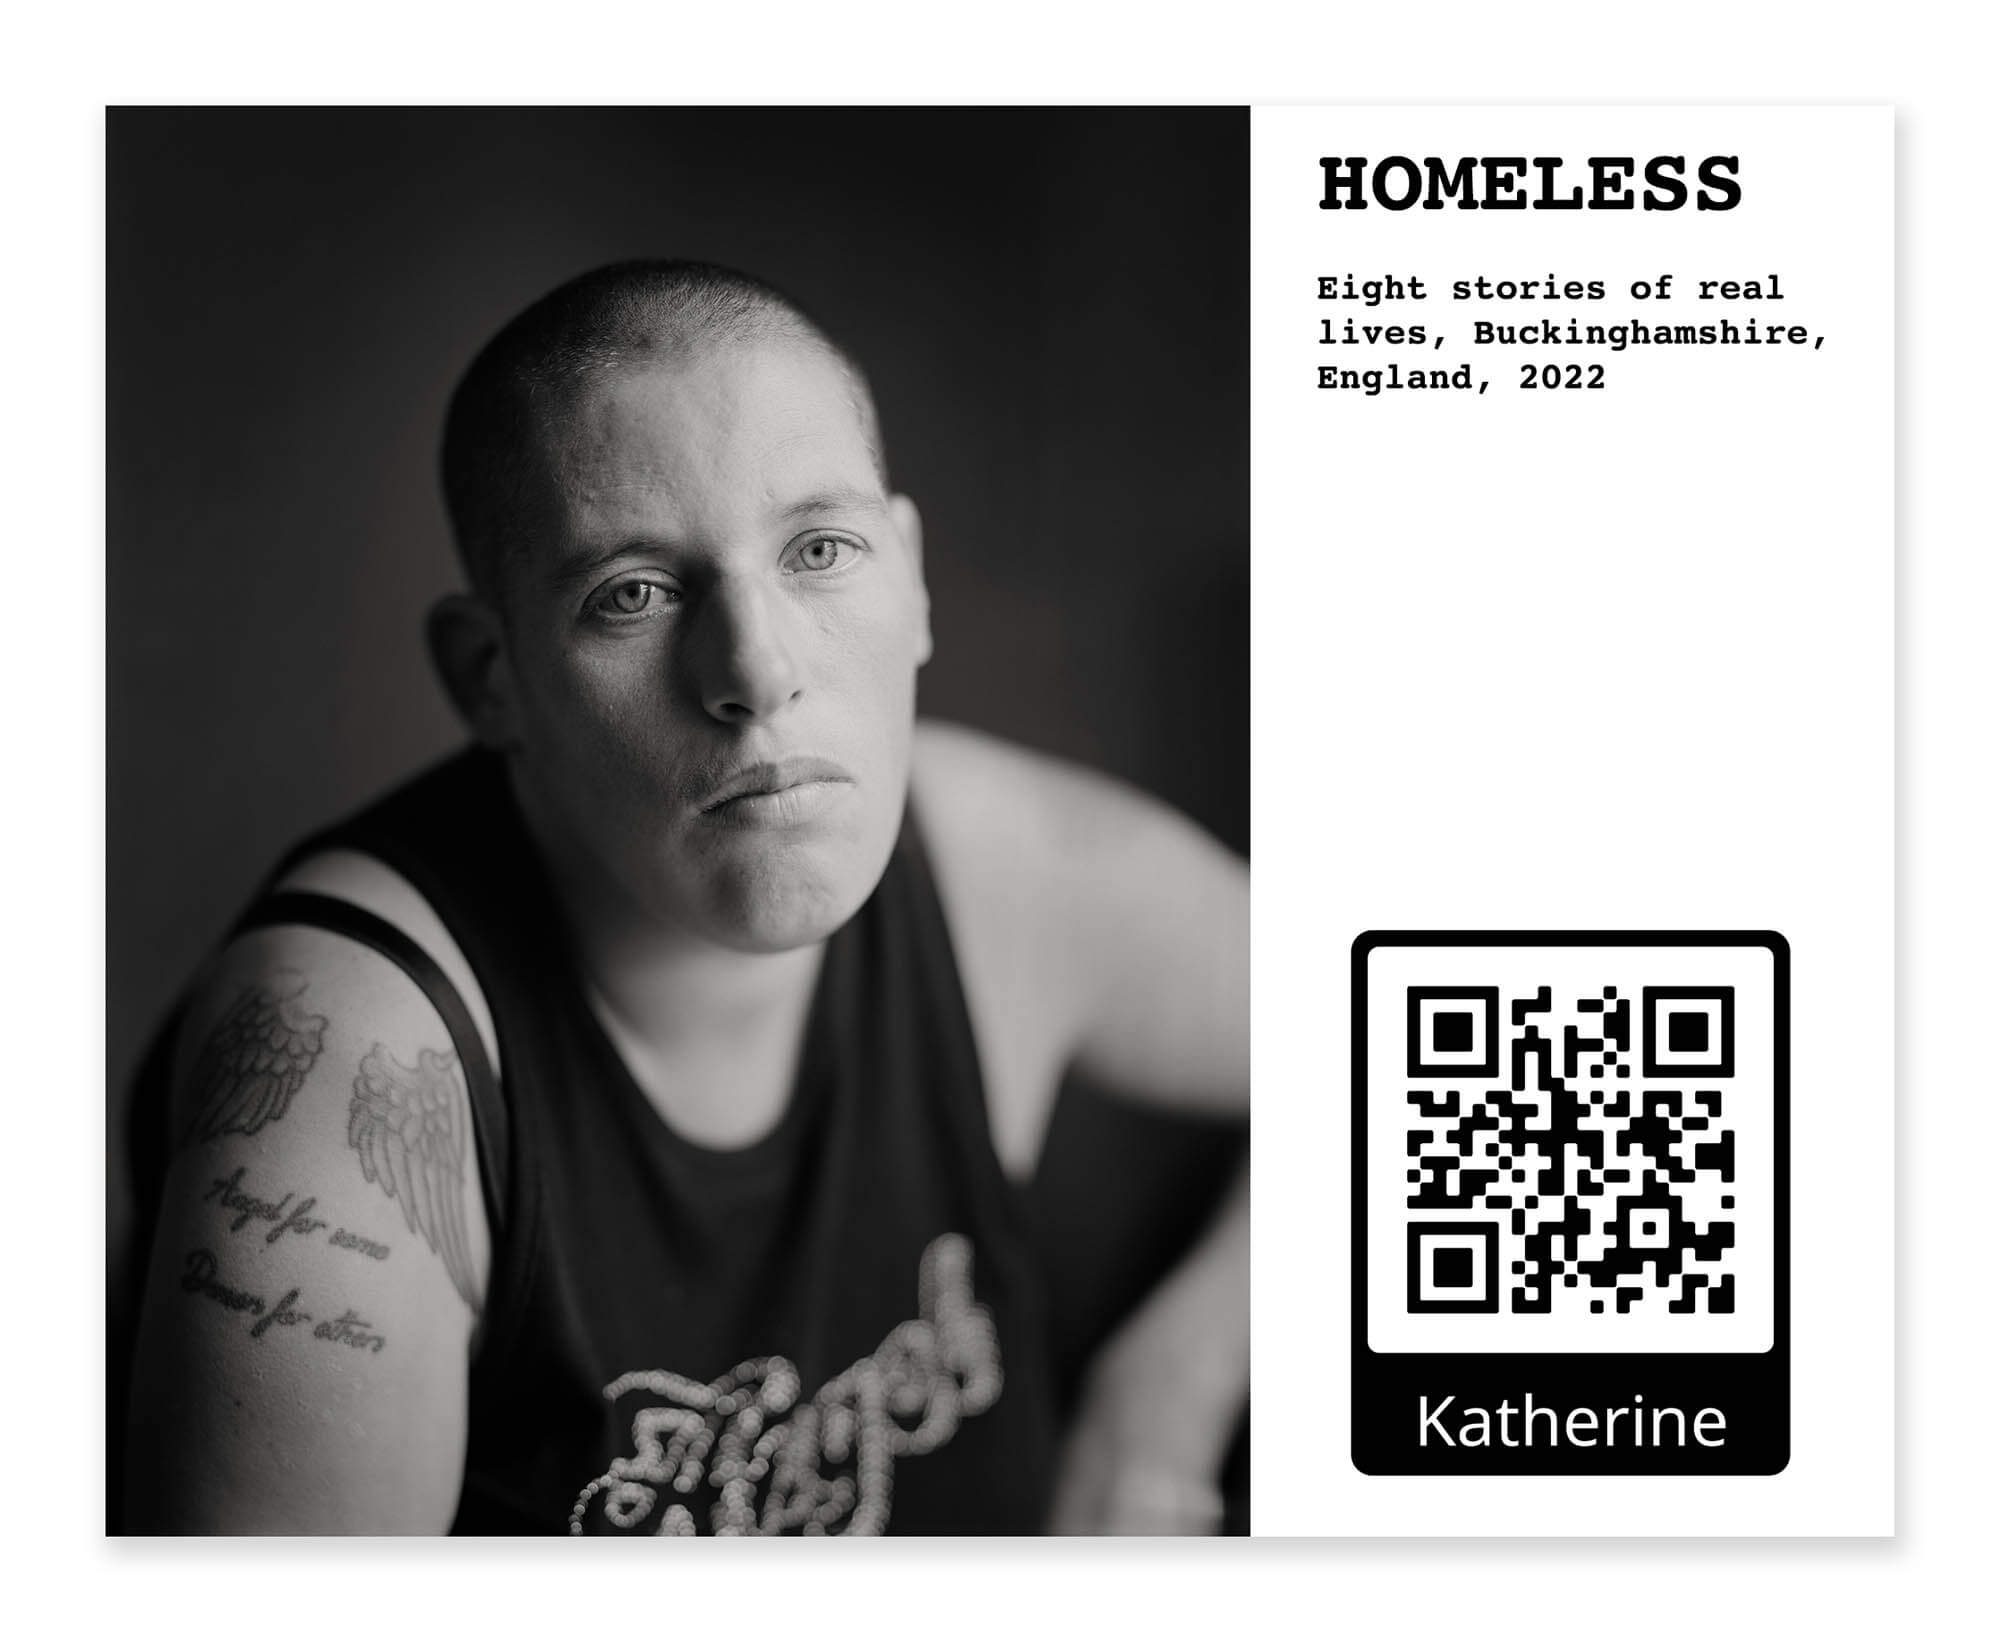 Kathryn, High Wycombe, England, 2022. From the series ‘HOMELESS: Eight stories of real lives, Buckinghamshire, England, 2022’